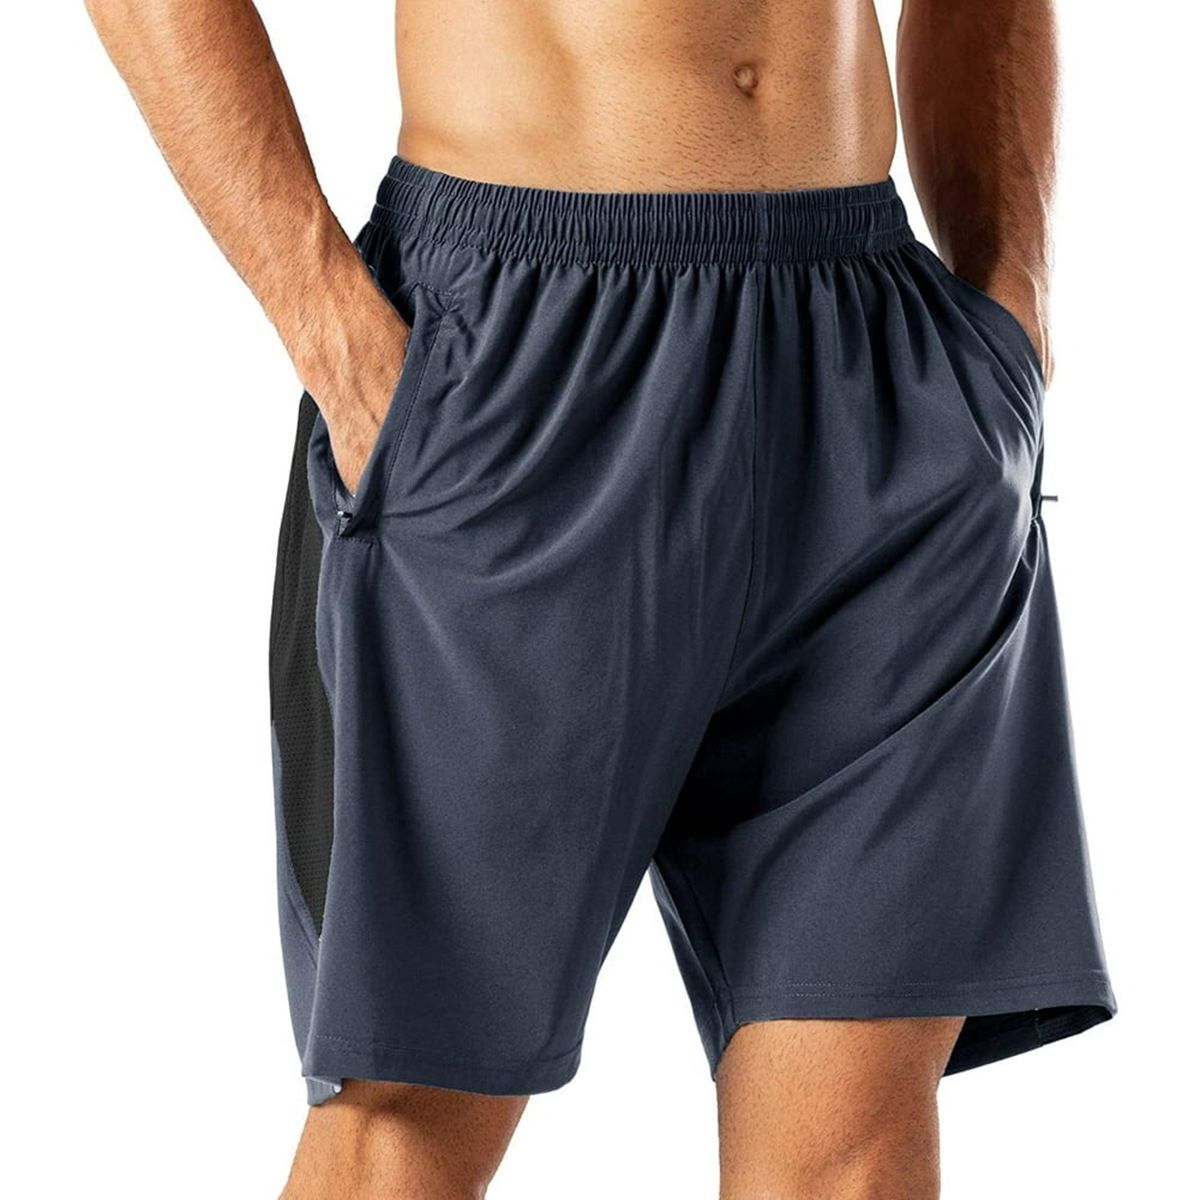 14 Amazing Athletic Shorts With Zipper Pockets For 2023